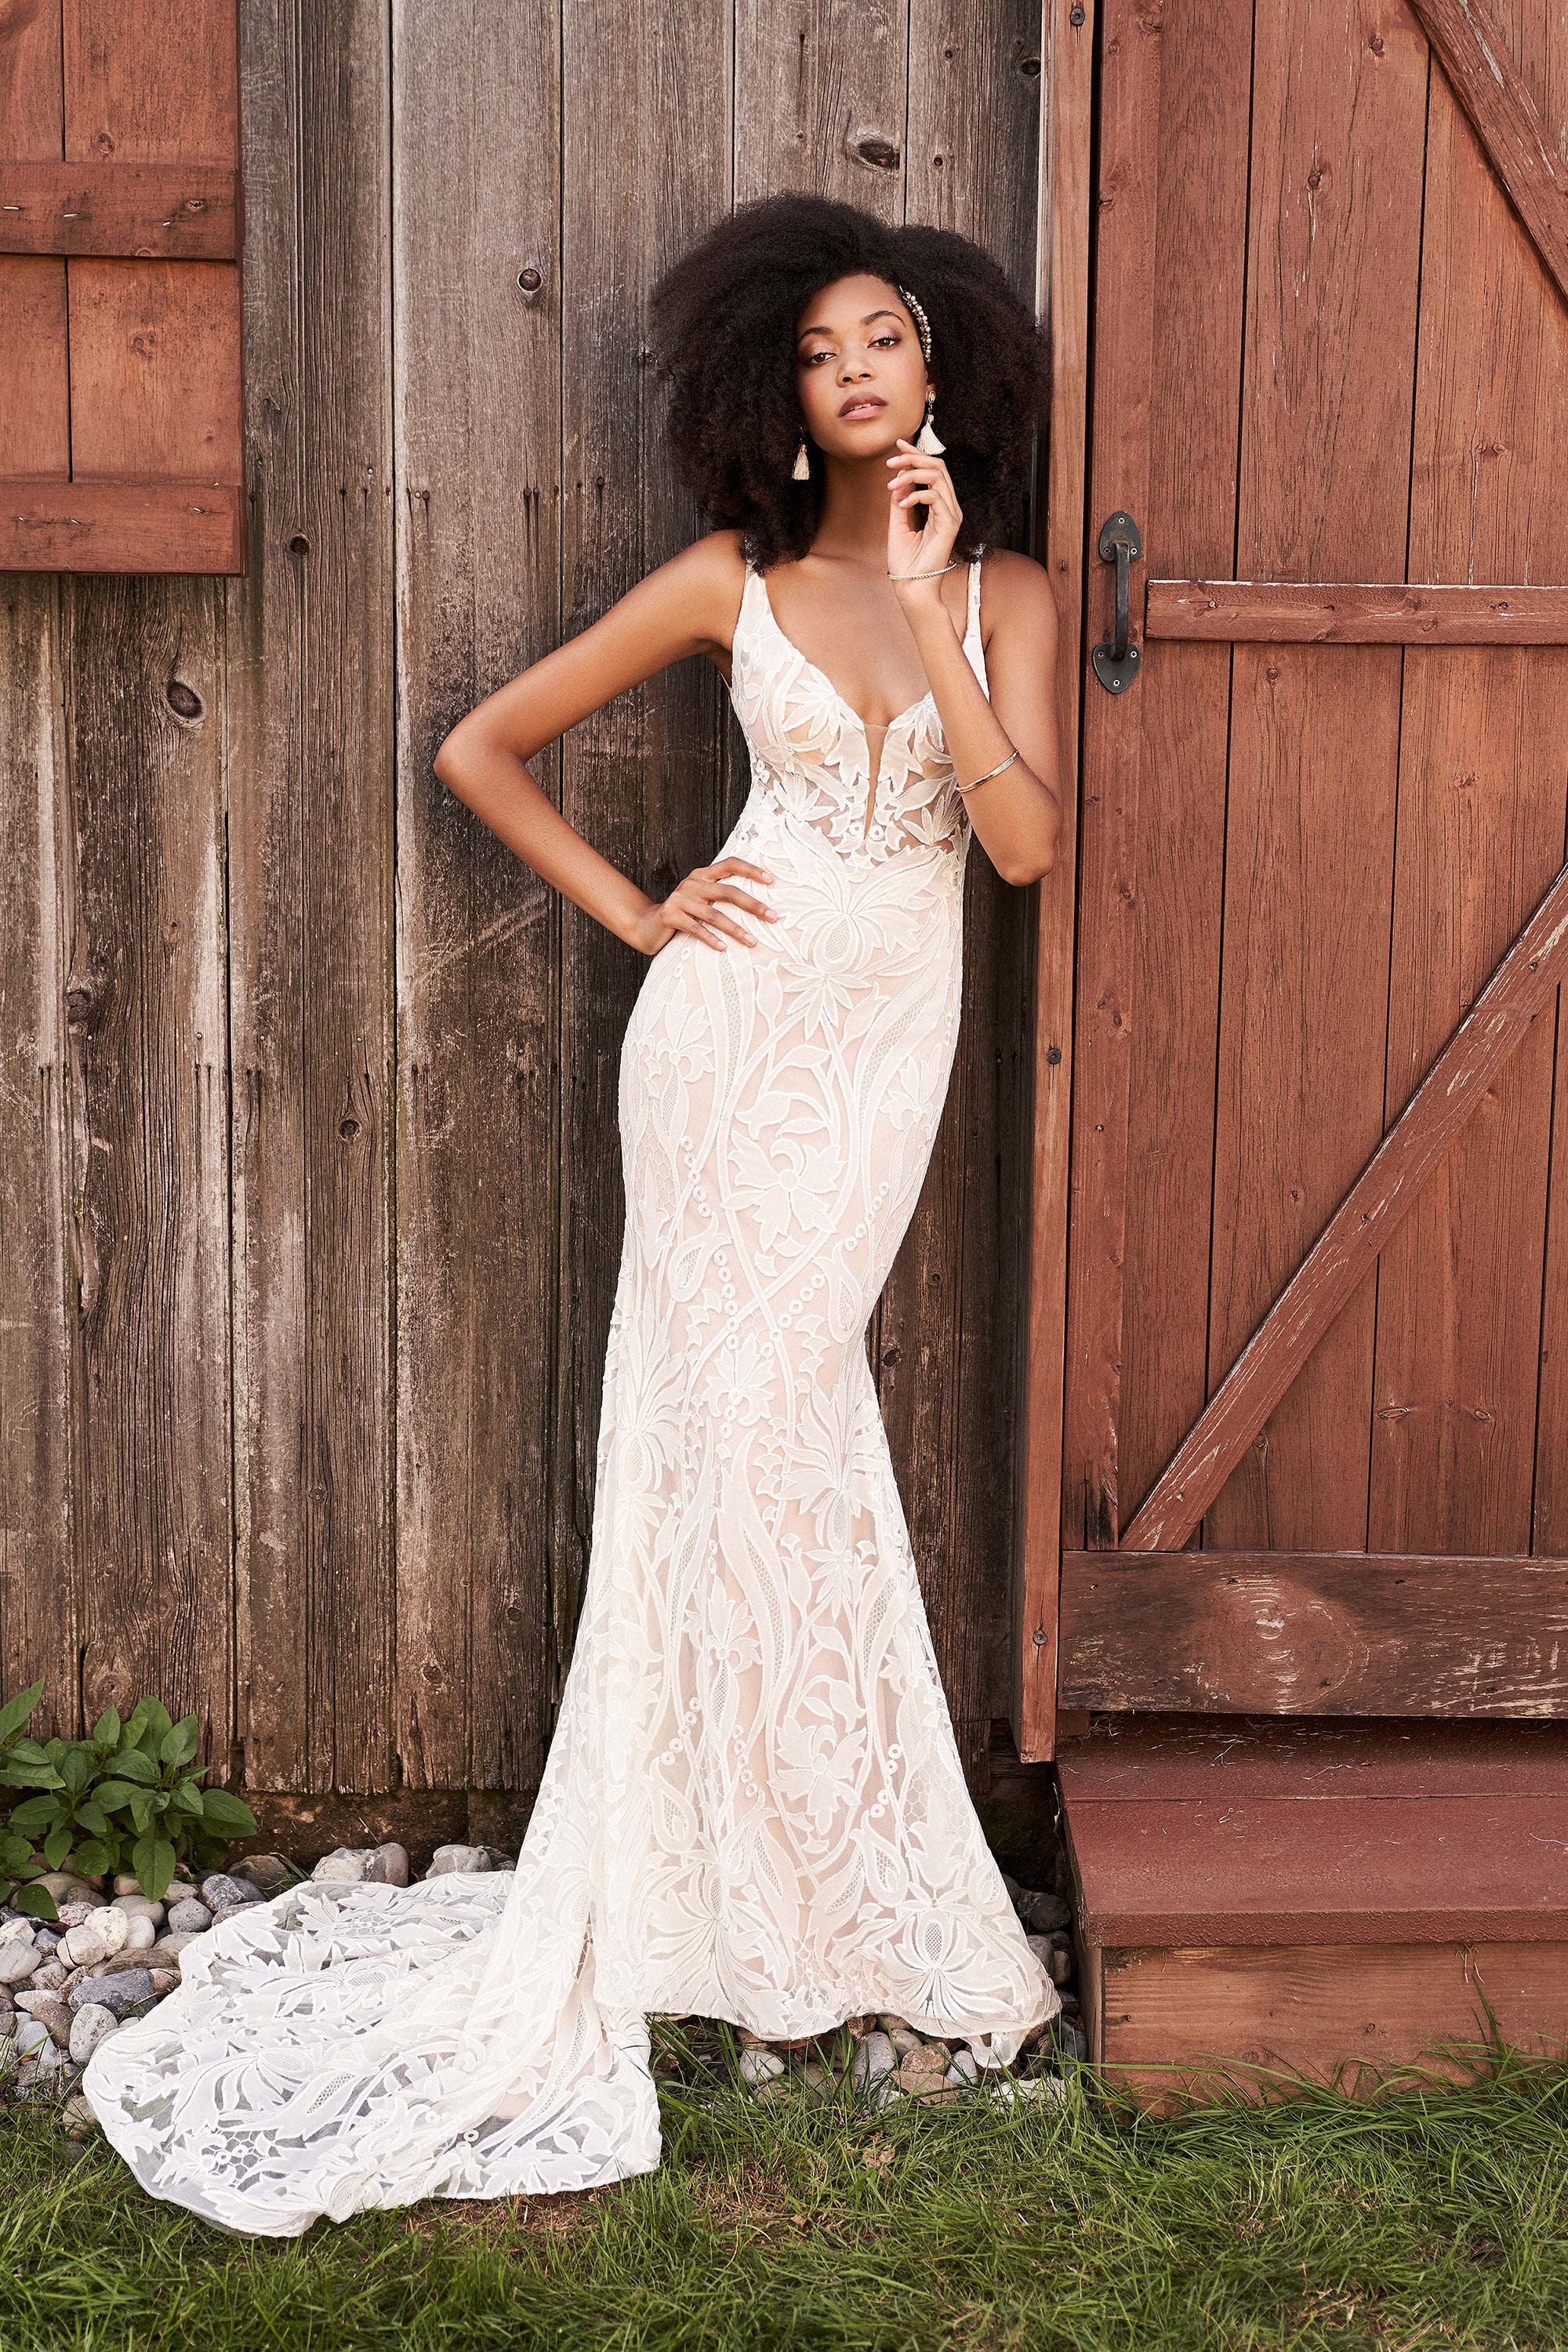 Plunging V-Neck Wedding Dress with Chiffon all-over Lace by